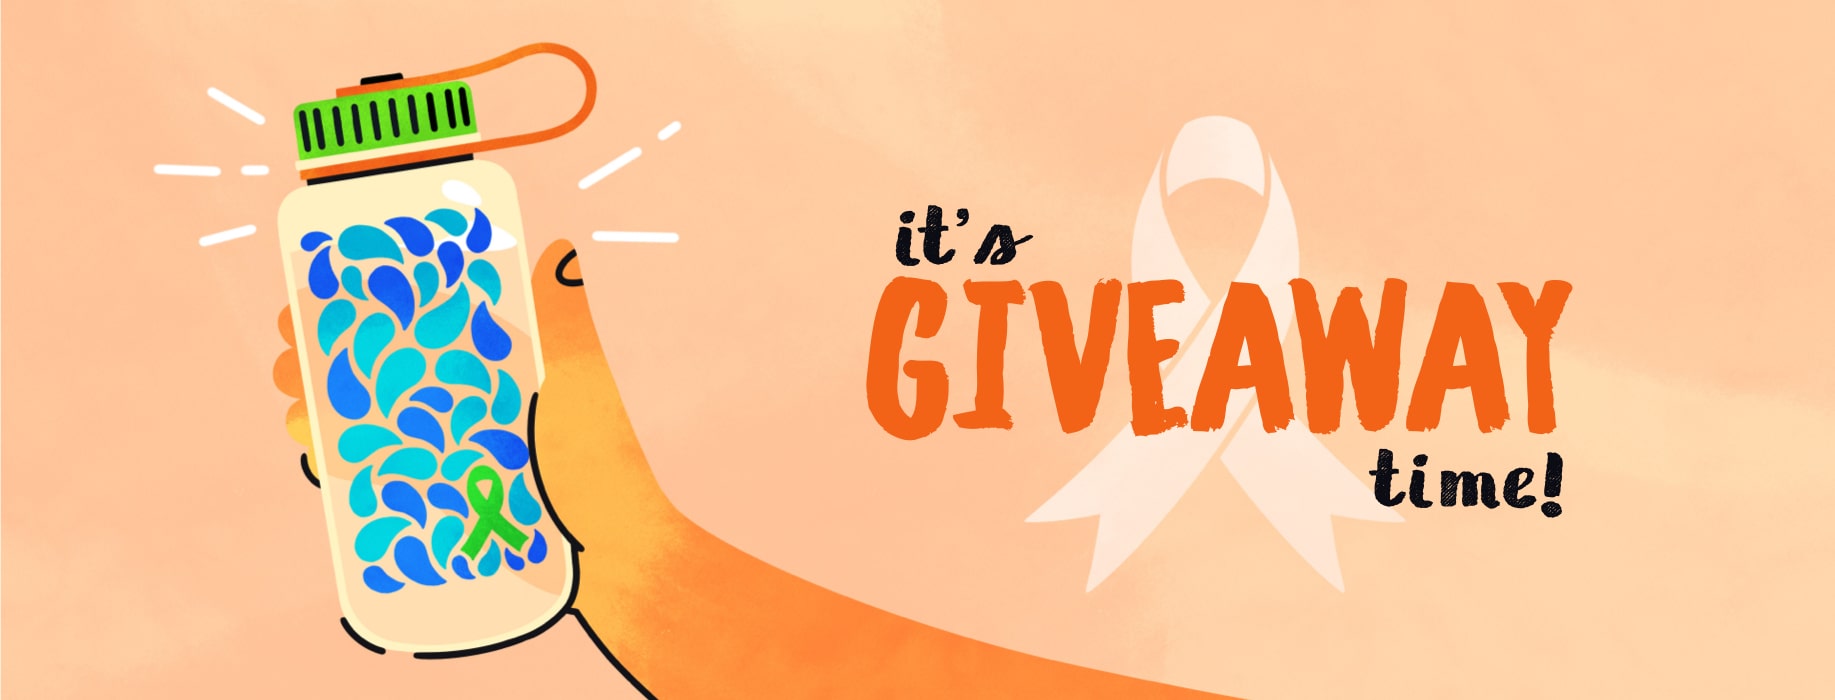 An illustrated hand holding up a Nalgene bottle for a community giveaway opportunity